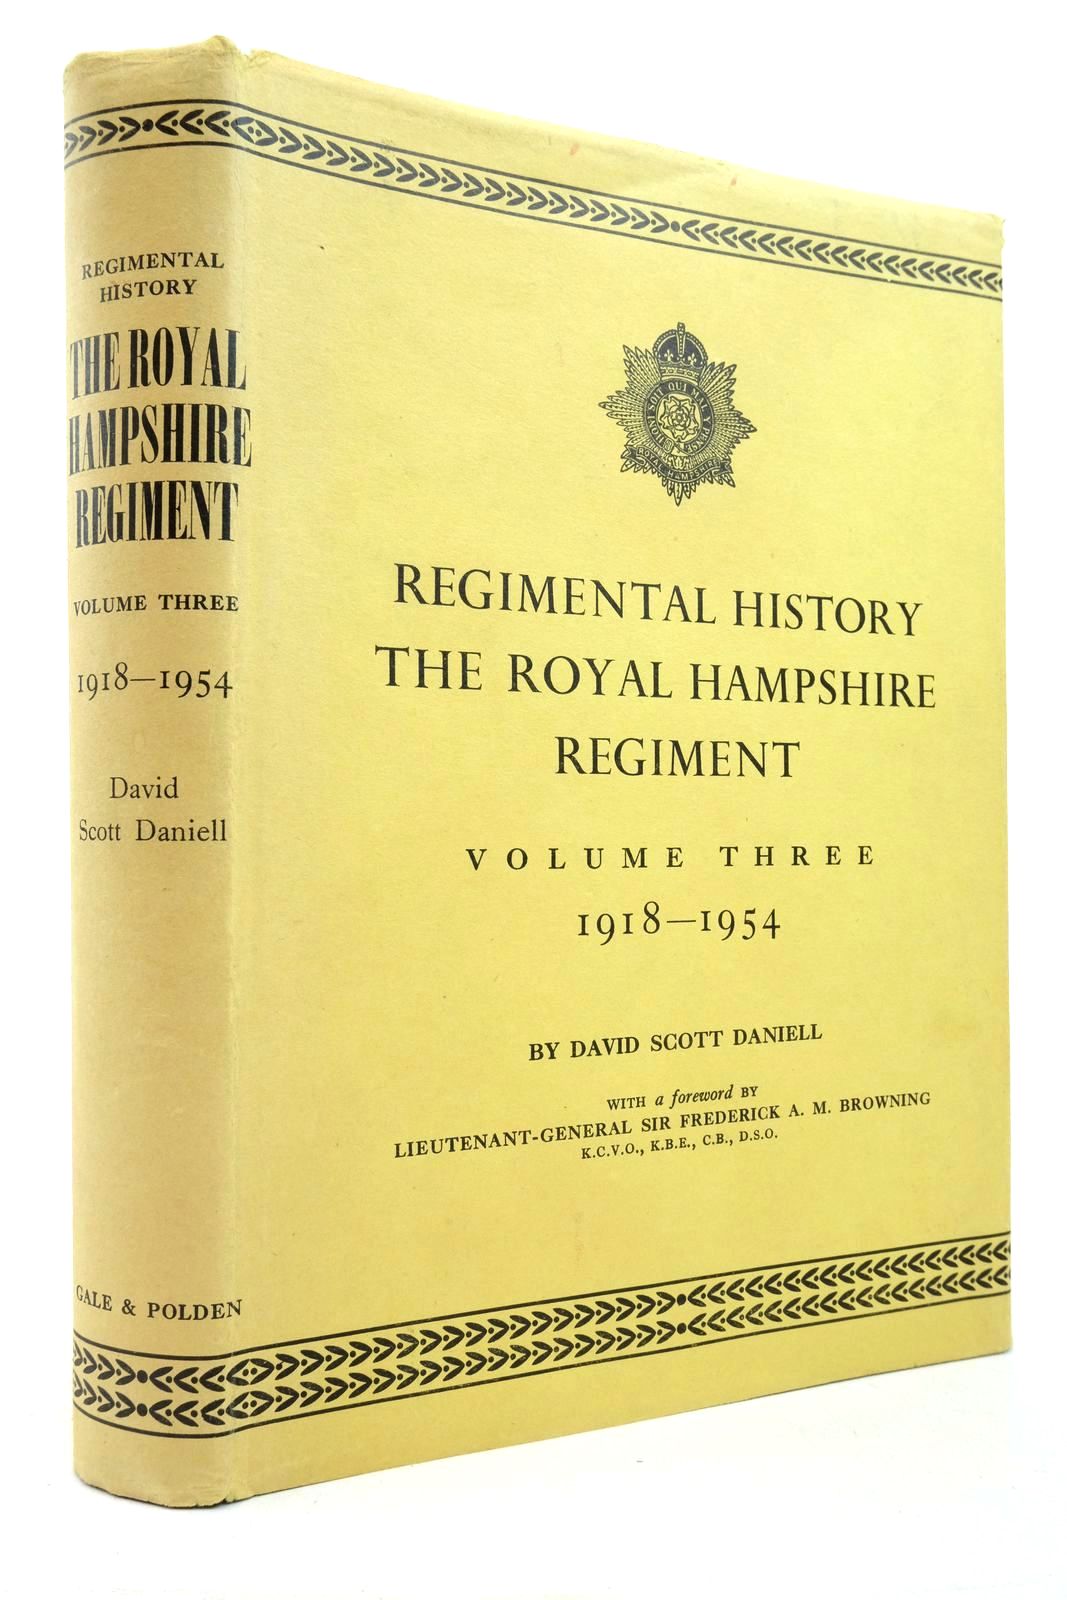 Photo of REGIMENTAL HISTORY THE ROYAL HAMPSHIRE REGIMENT VOLUME THREE 1918-1954 written by Daniell, David Scott published by Gale &amp; Polden, Ltd. (STOCK CODE: 2137734)  for sale by Stella & Rose's Books